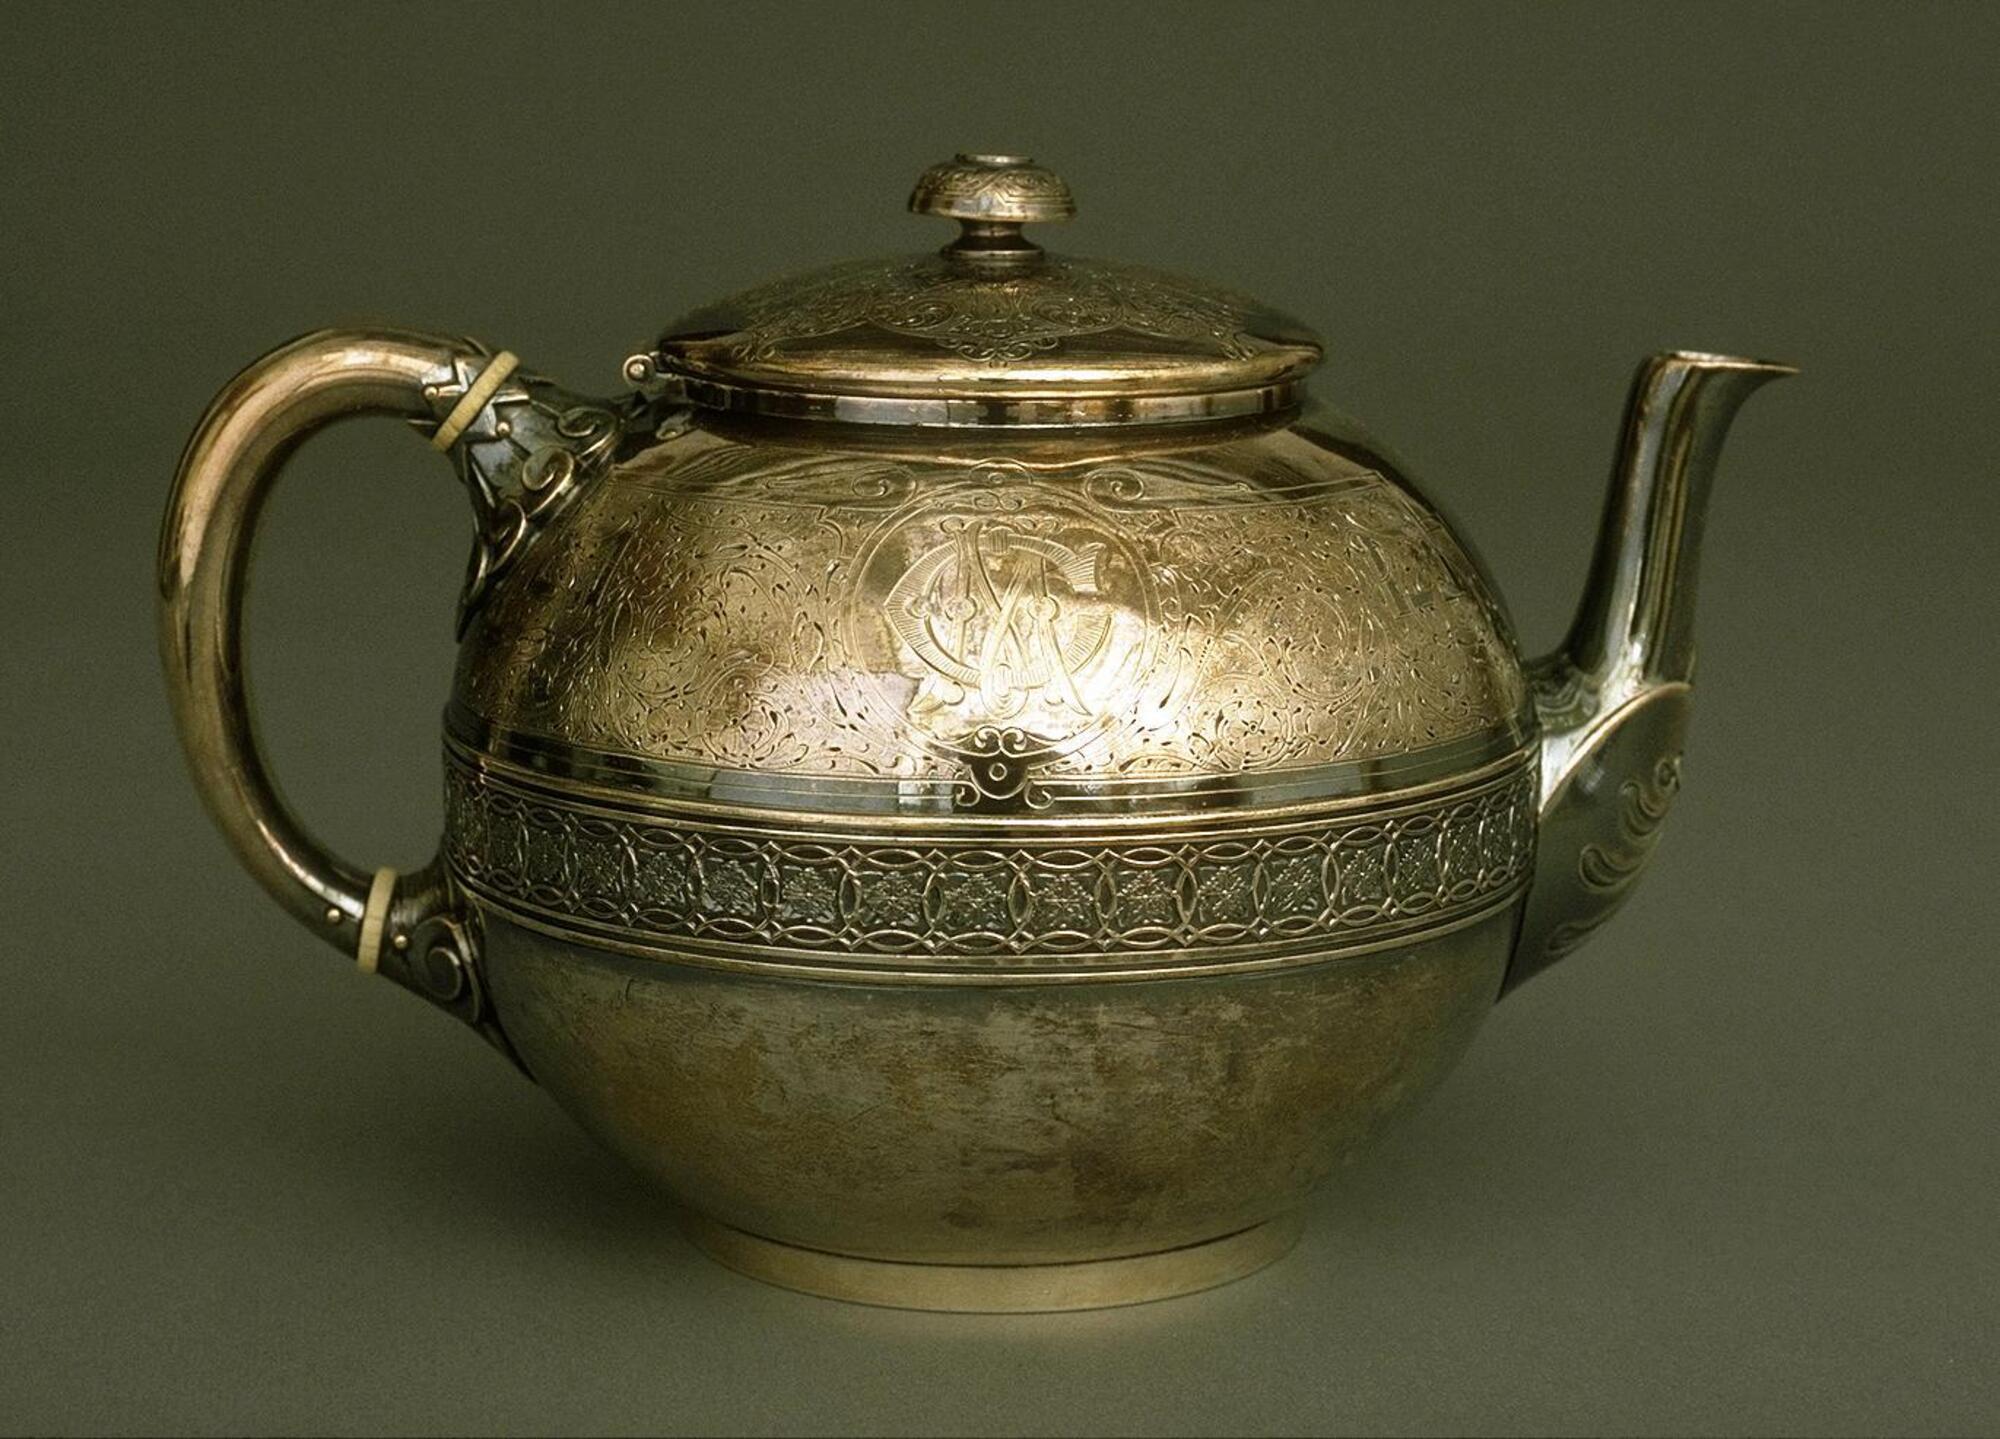 Silver teapot-shaped vessel with lid, handle, and spout and a band of decoration around center of the body